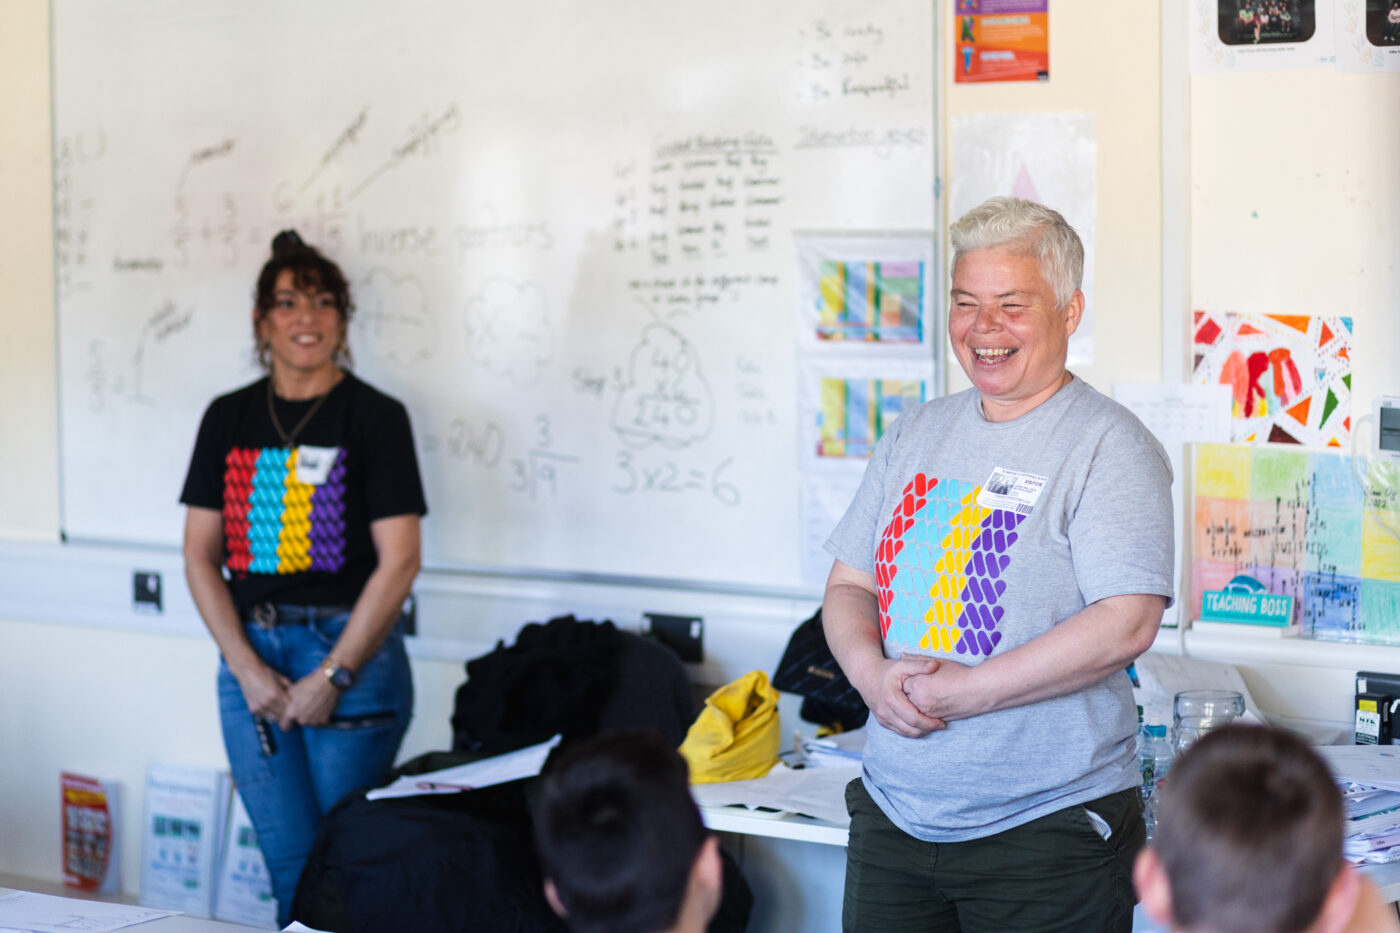 An artist and facilitator laughing at the front of a classroom